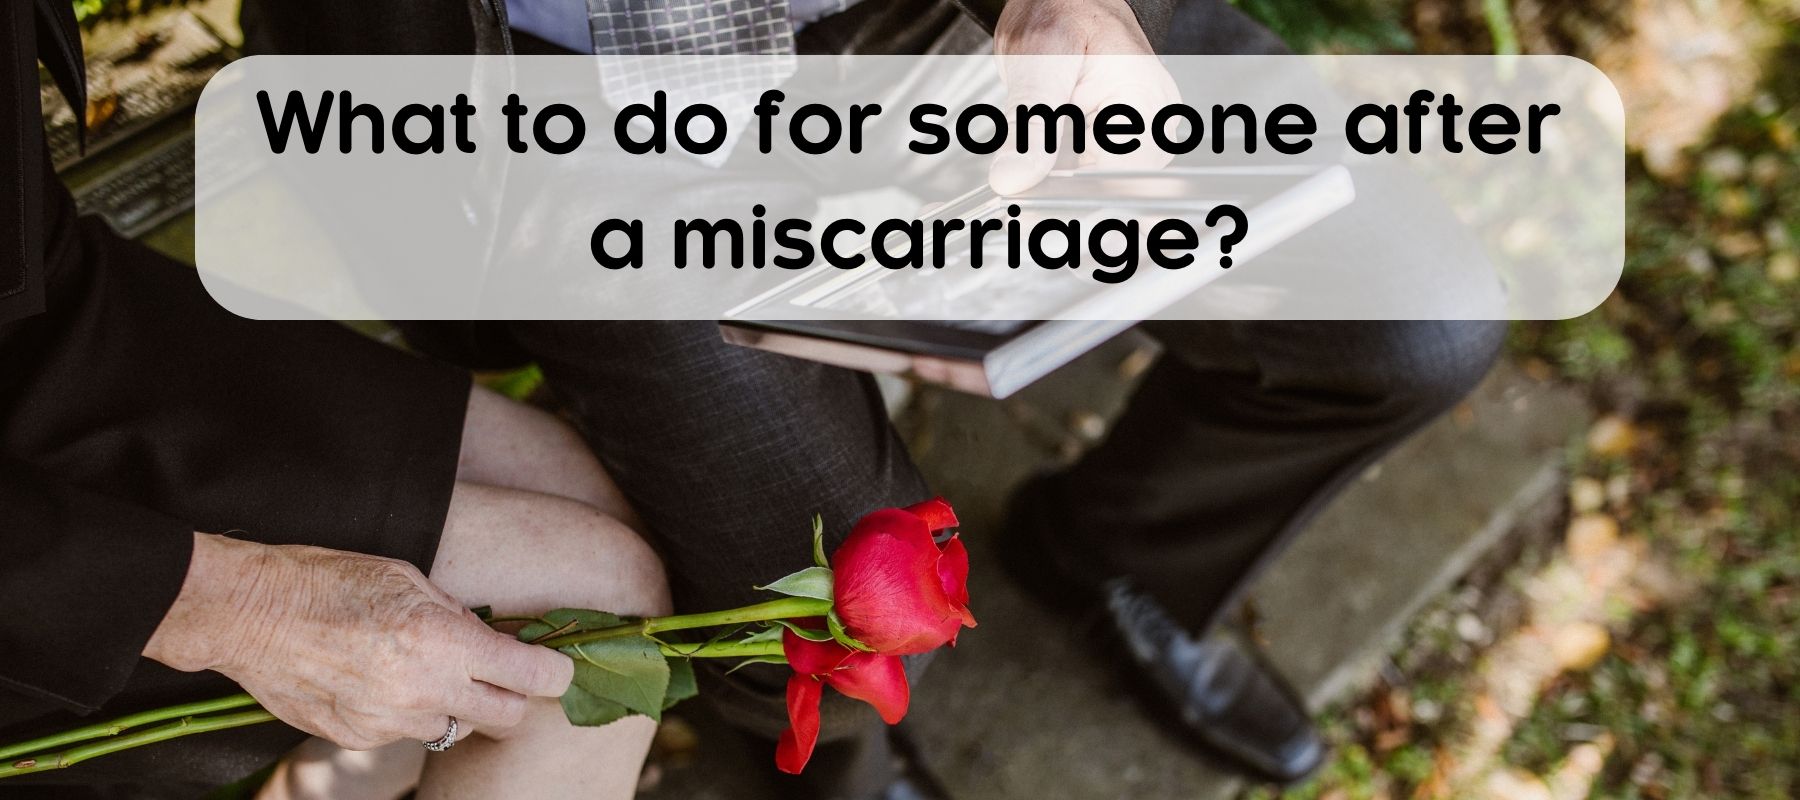 what-to-do-for-someone-after-miscarrage?